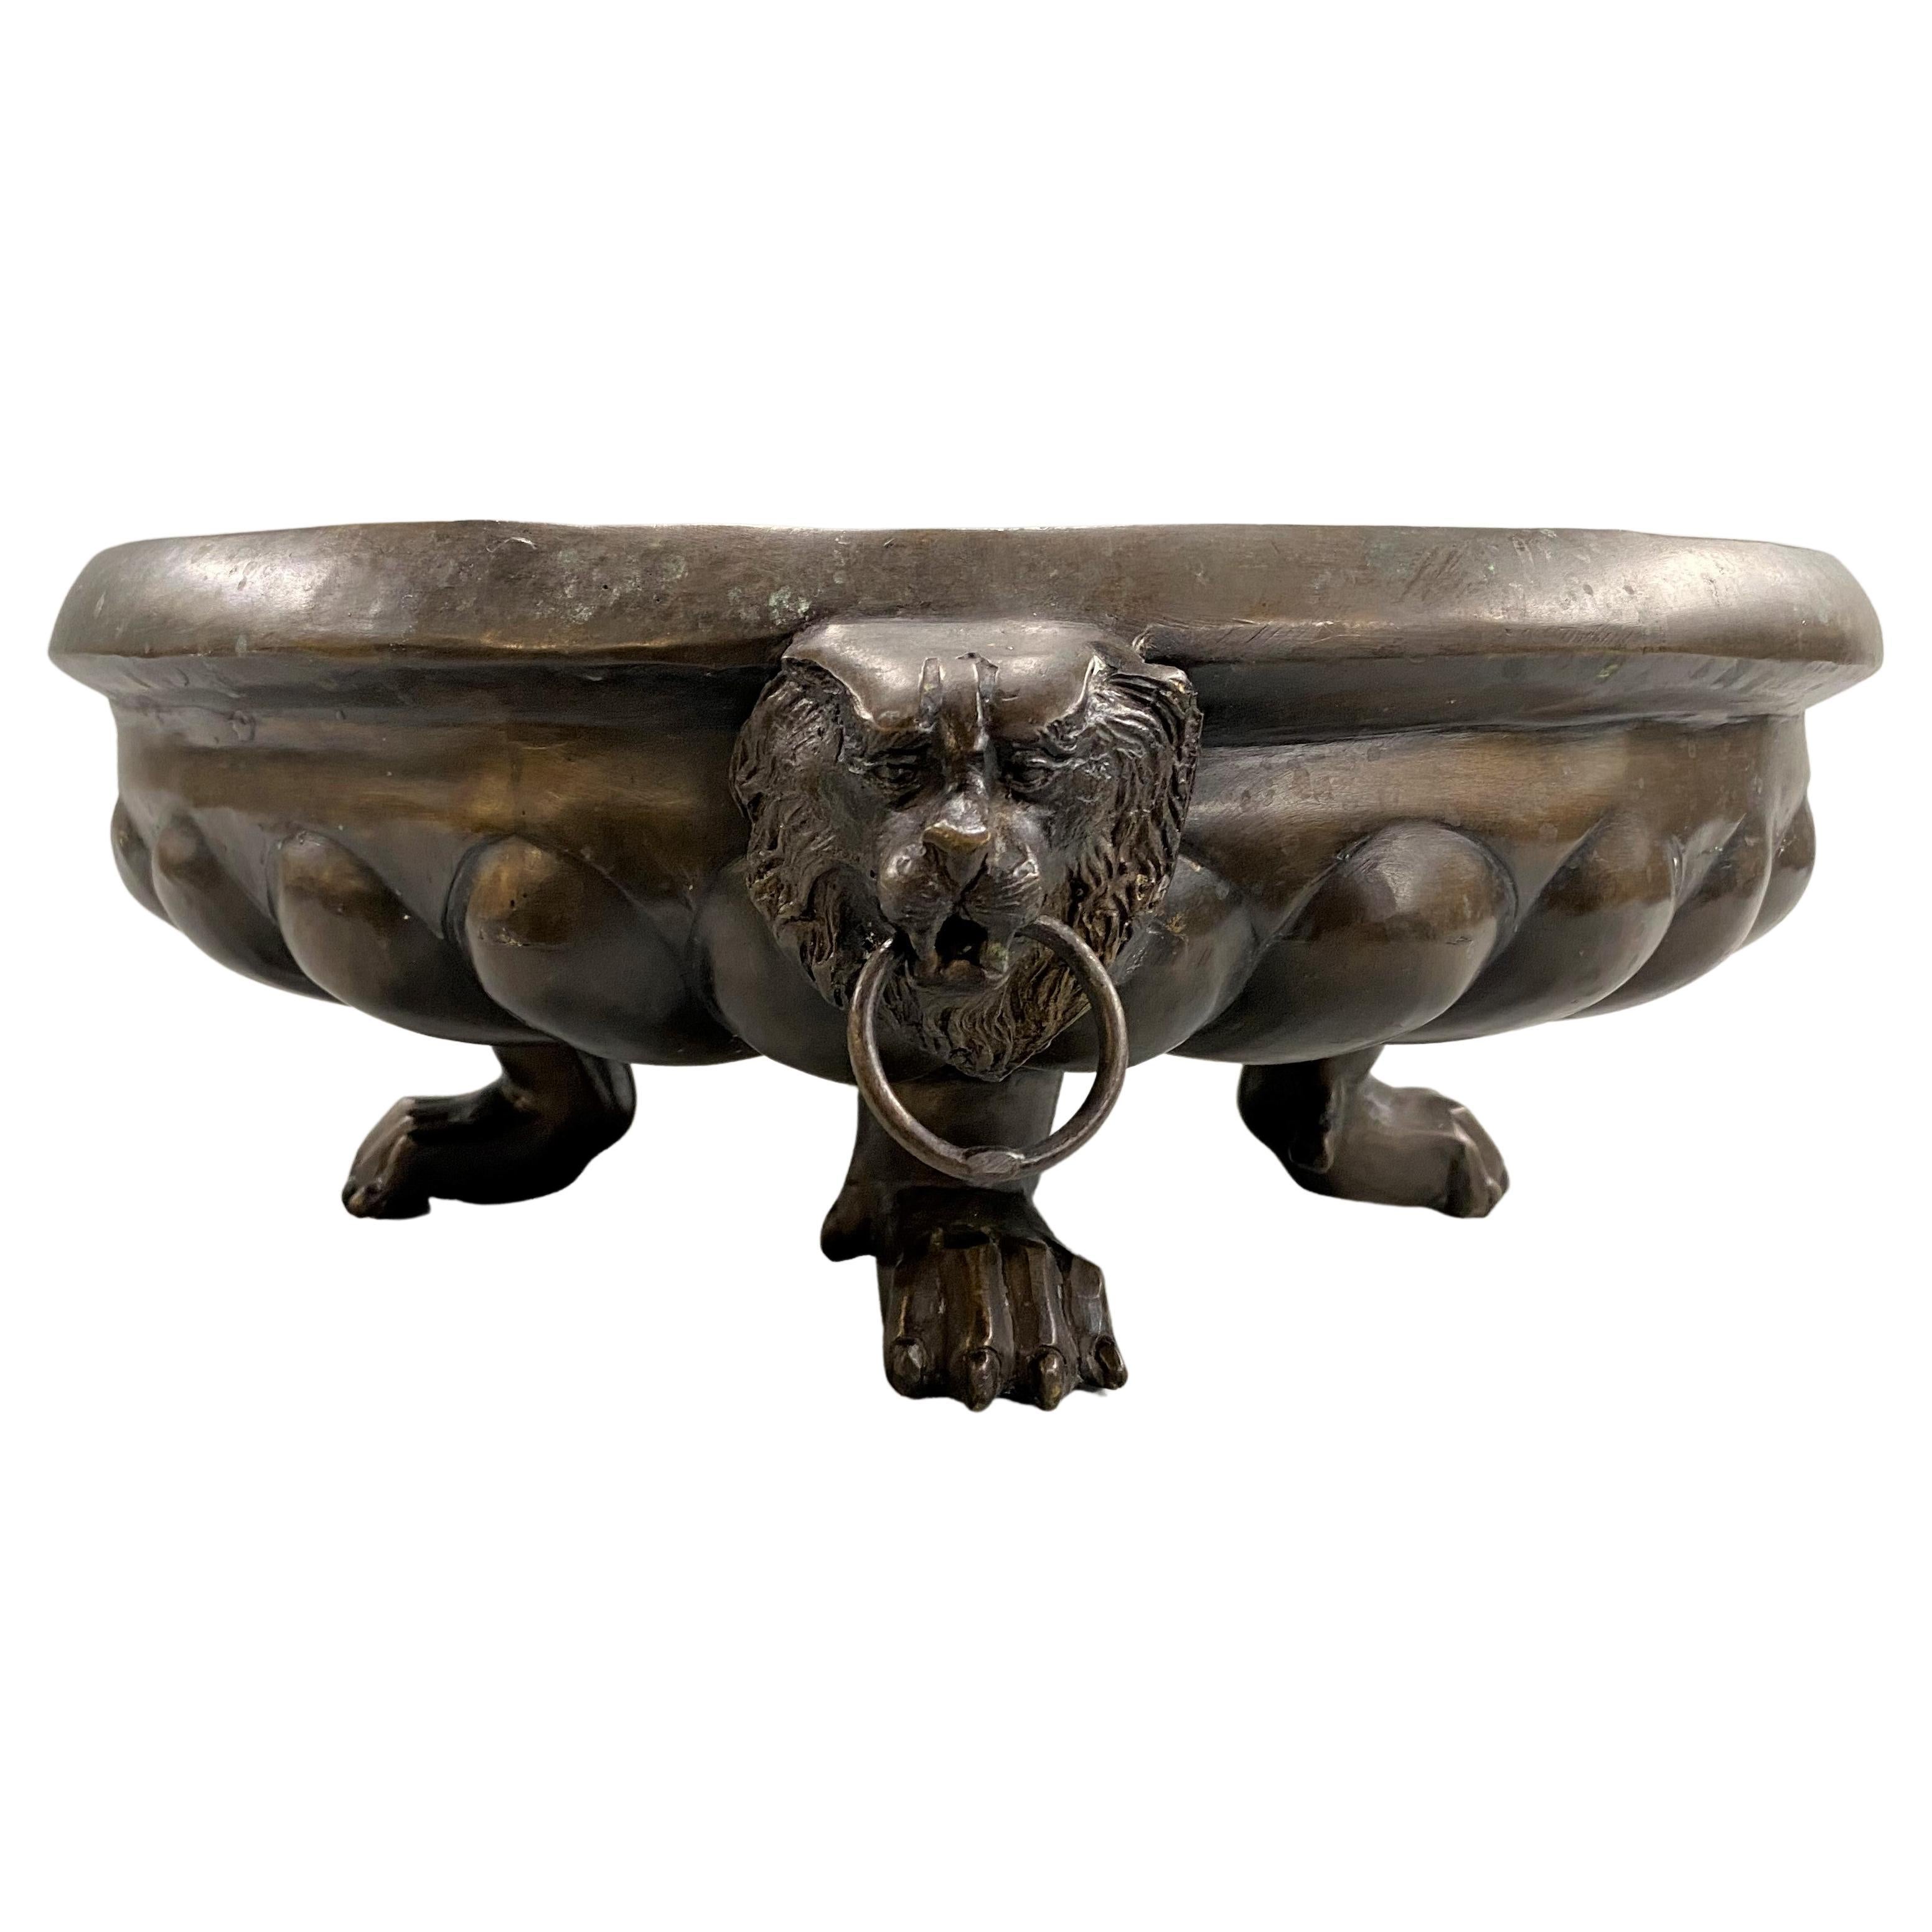 Continental Patinated Bronze Jardiniere with Lions Heads and Paw Feet